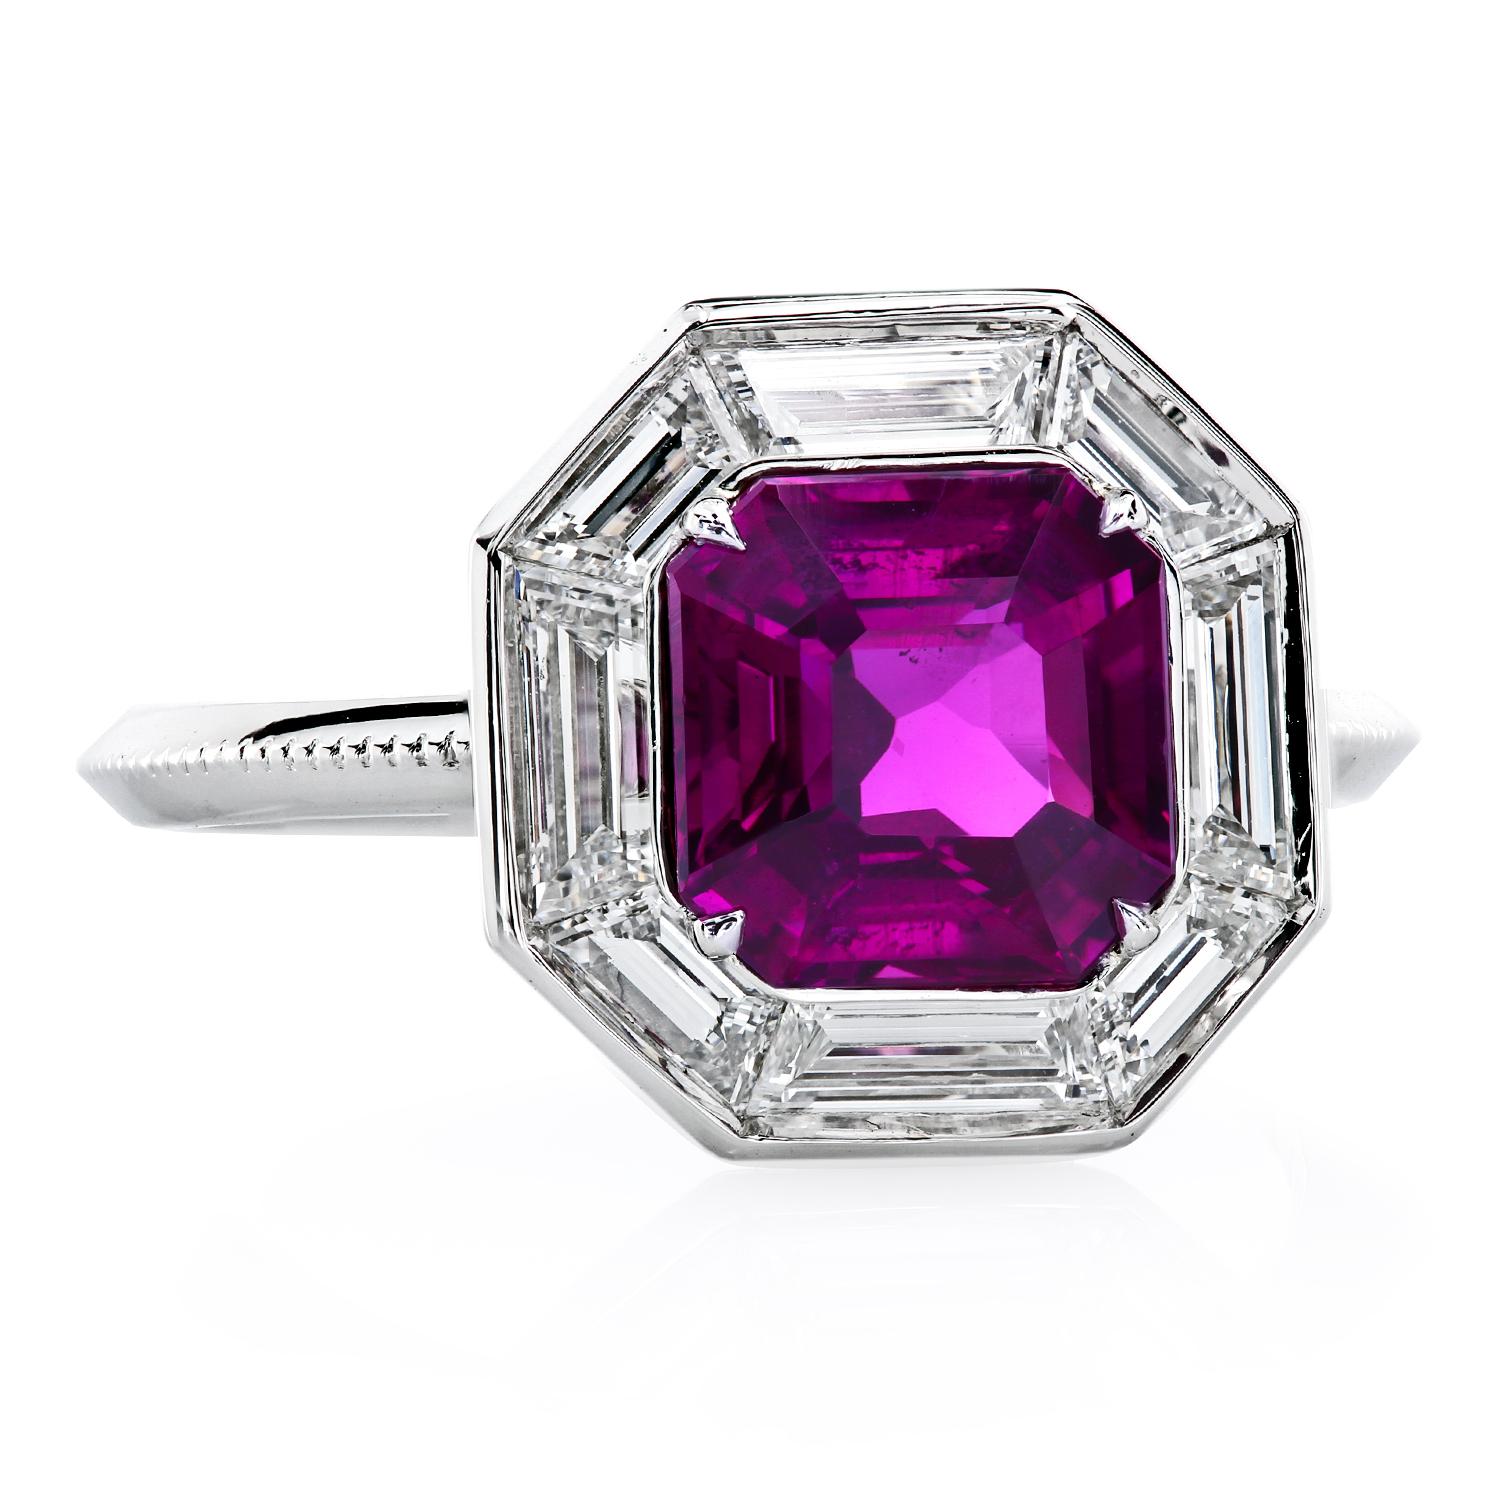 A stunning piece of luxury, one-of-a-kind platinum ring with a 2.27-carat vivid-pink sapphire, the embodiment of love and protection. The Asscher cut sapphire accompanied by GIA report #5161149243 is a crystal-clear beautifully faceted gem framed